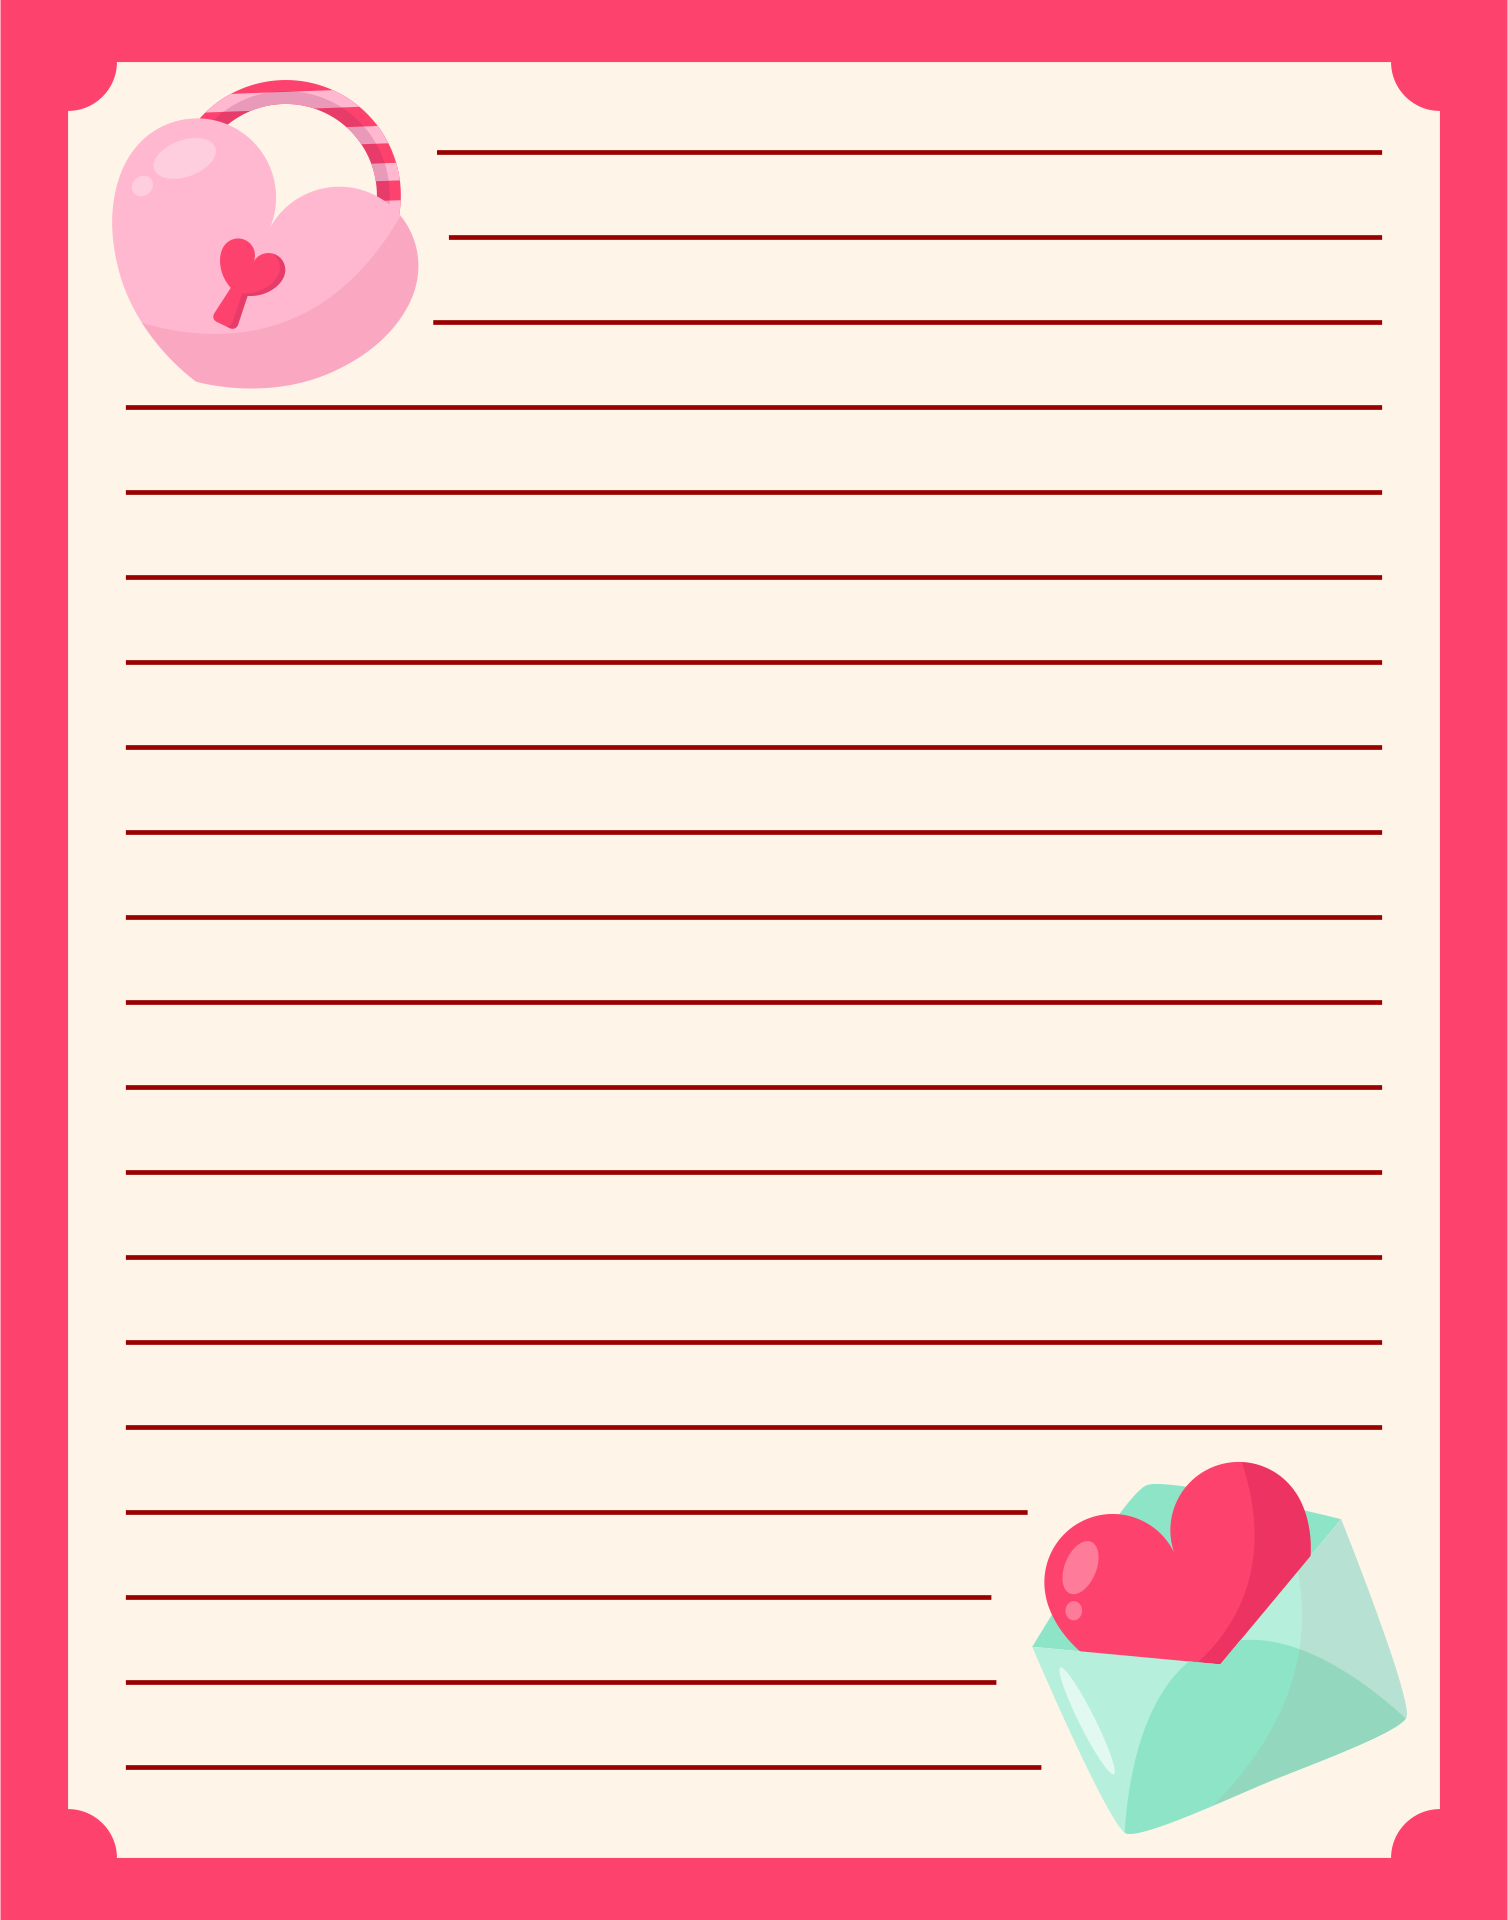 Love Letter Writing Paper